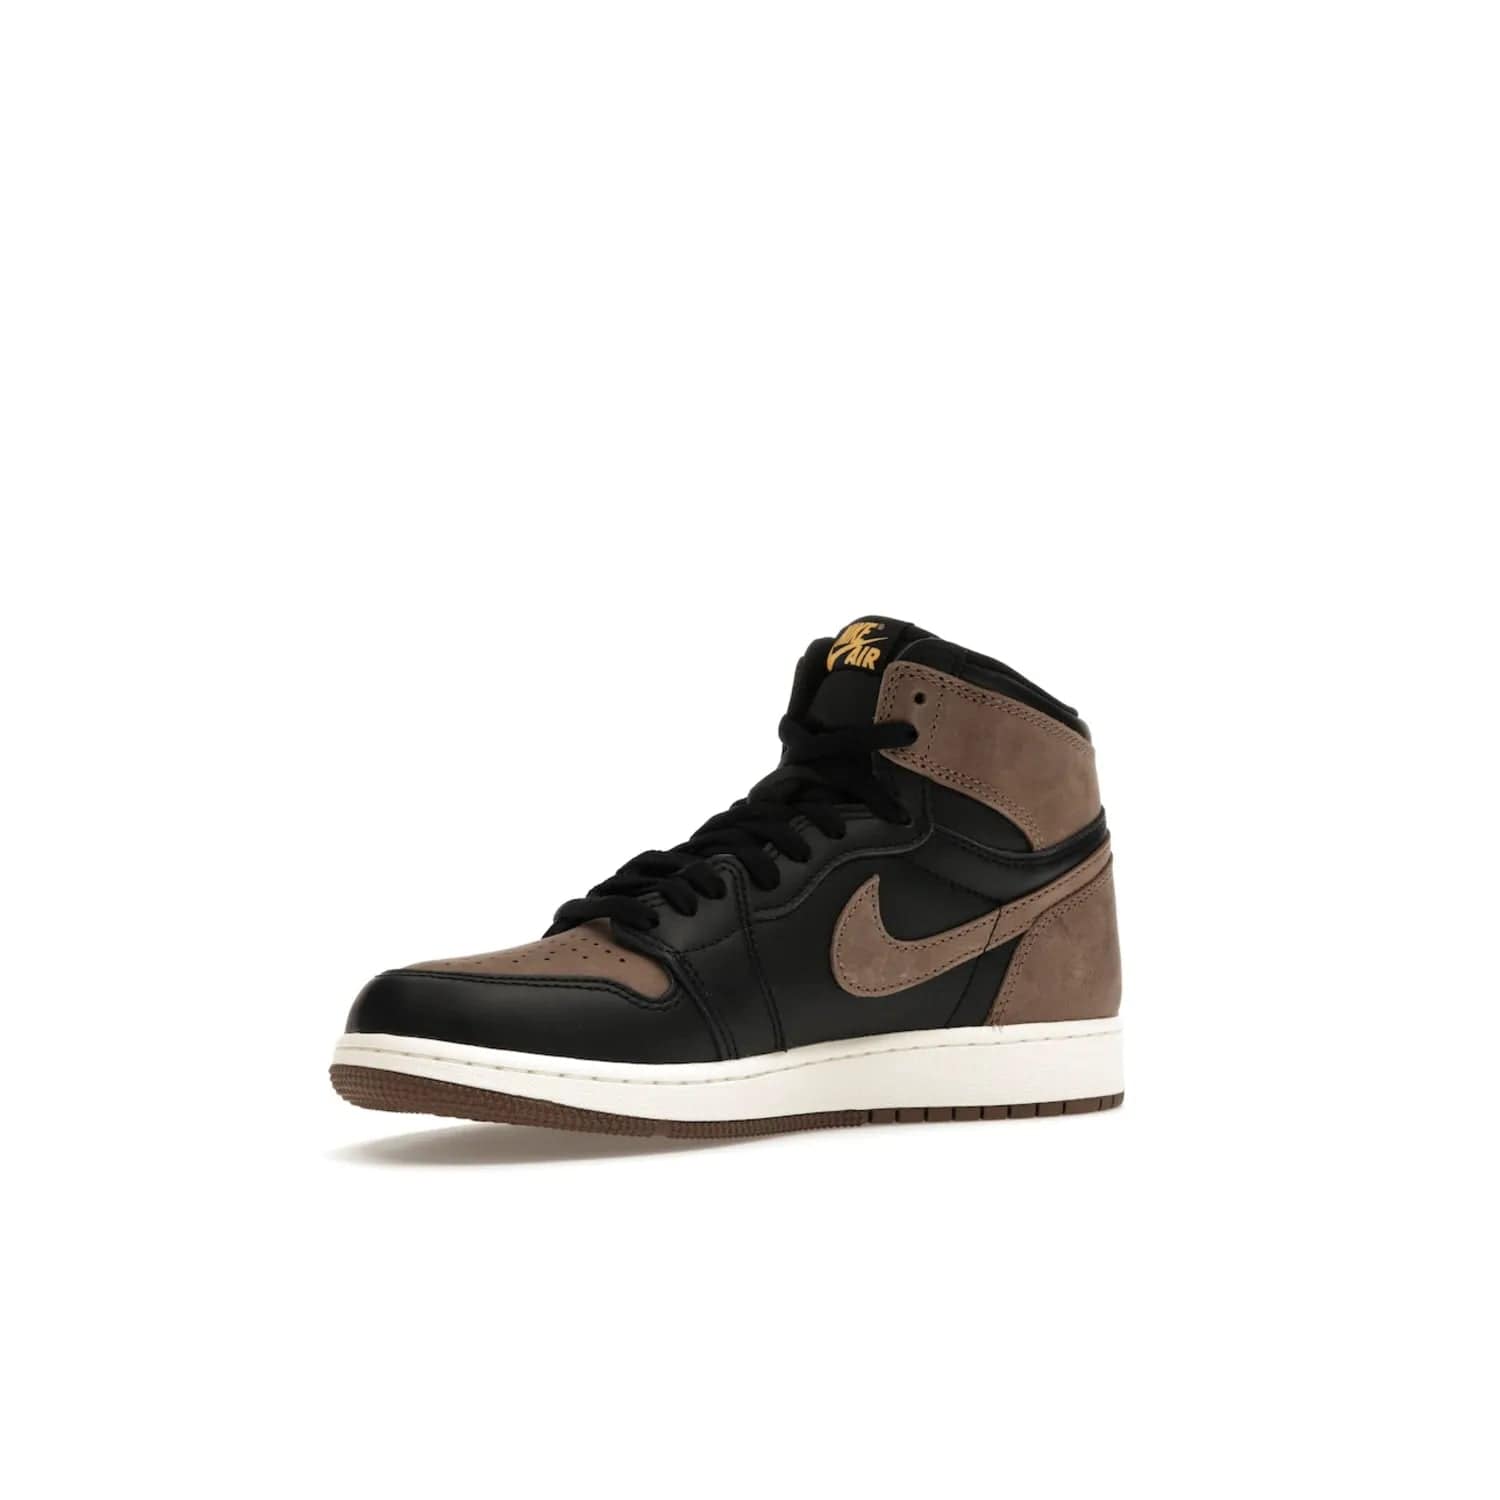 Jordan 1 Retro High OG Palomino (GS) - Image 16 - Only at www.BallersClubKickz.com - Introducing the luxurious Jordan 1 Retro High OG Palomino (GS). Featuring black leather with metallic gold and palomino accents, this sneaker is perfect for any occasion. Grab yours when they release on September 2nd of 2023.